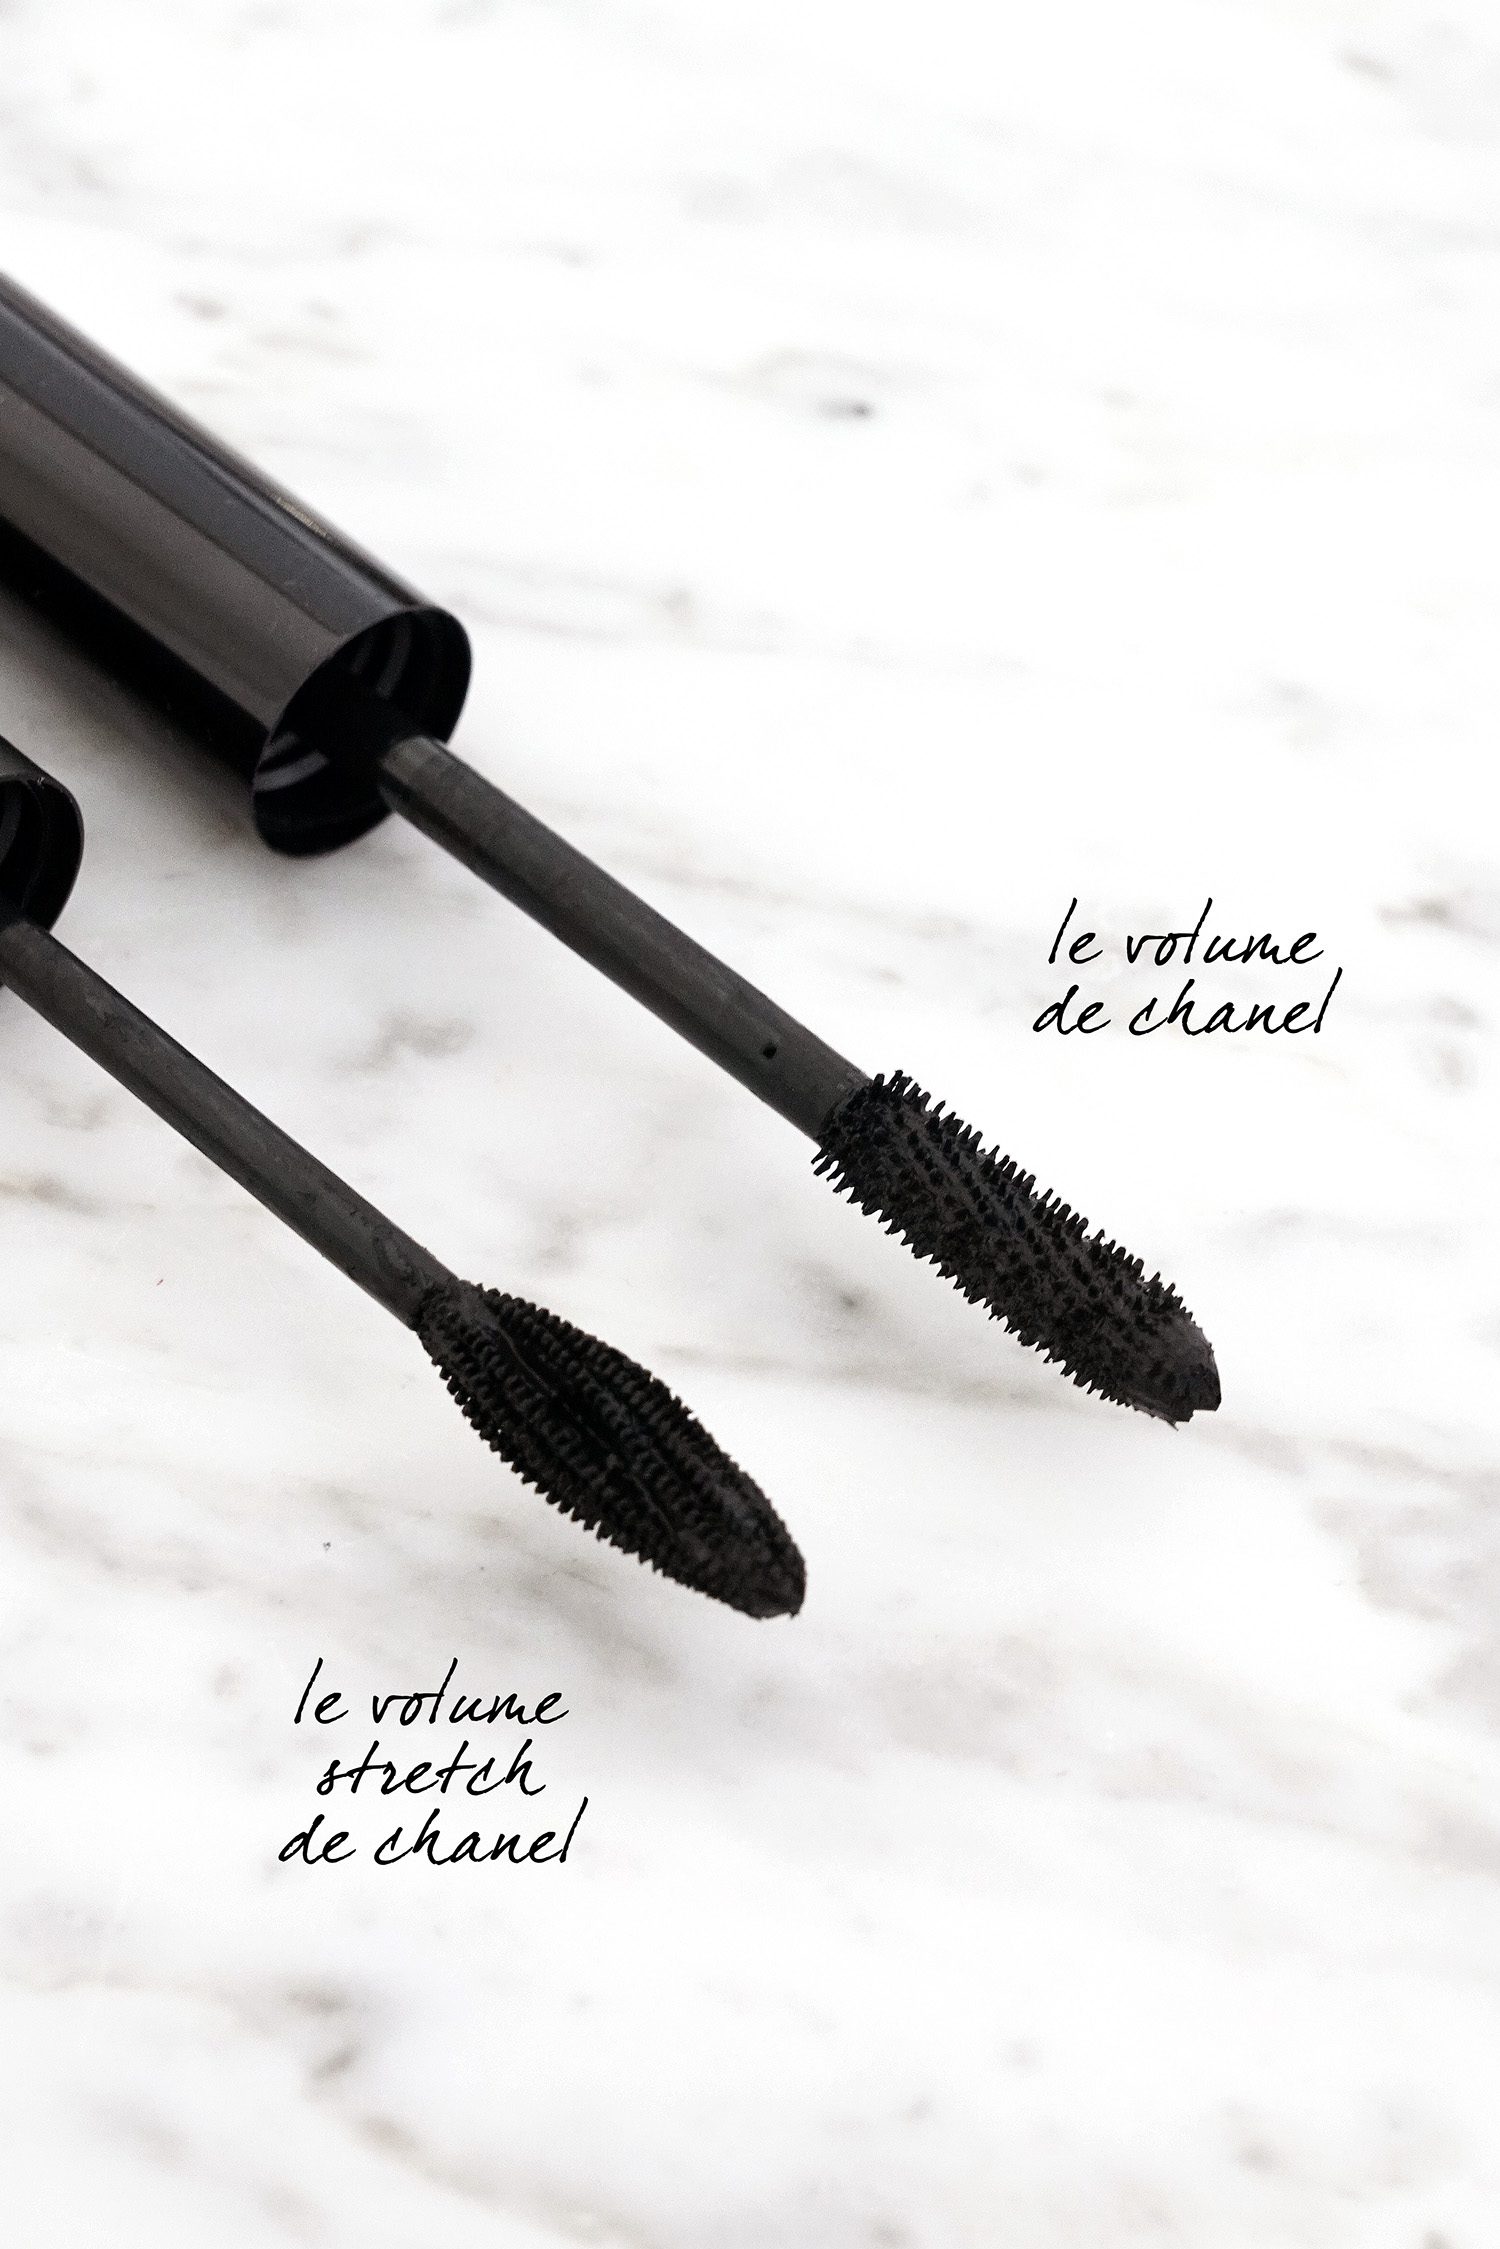 Chanel Eye Collection - New Stretch Mascara, Liquid Liner + Brow Duos - The  Beauty Look Book